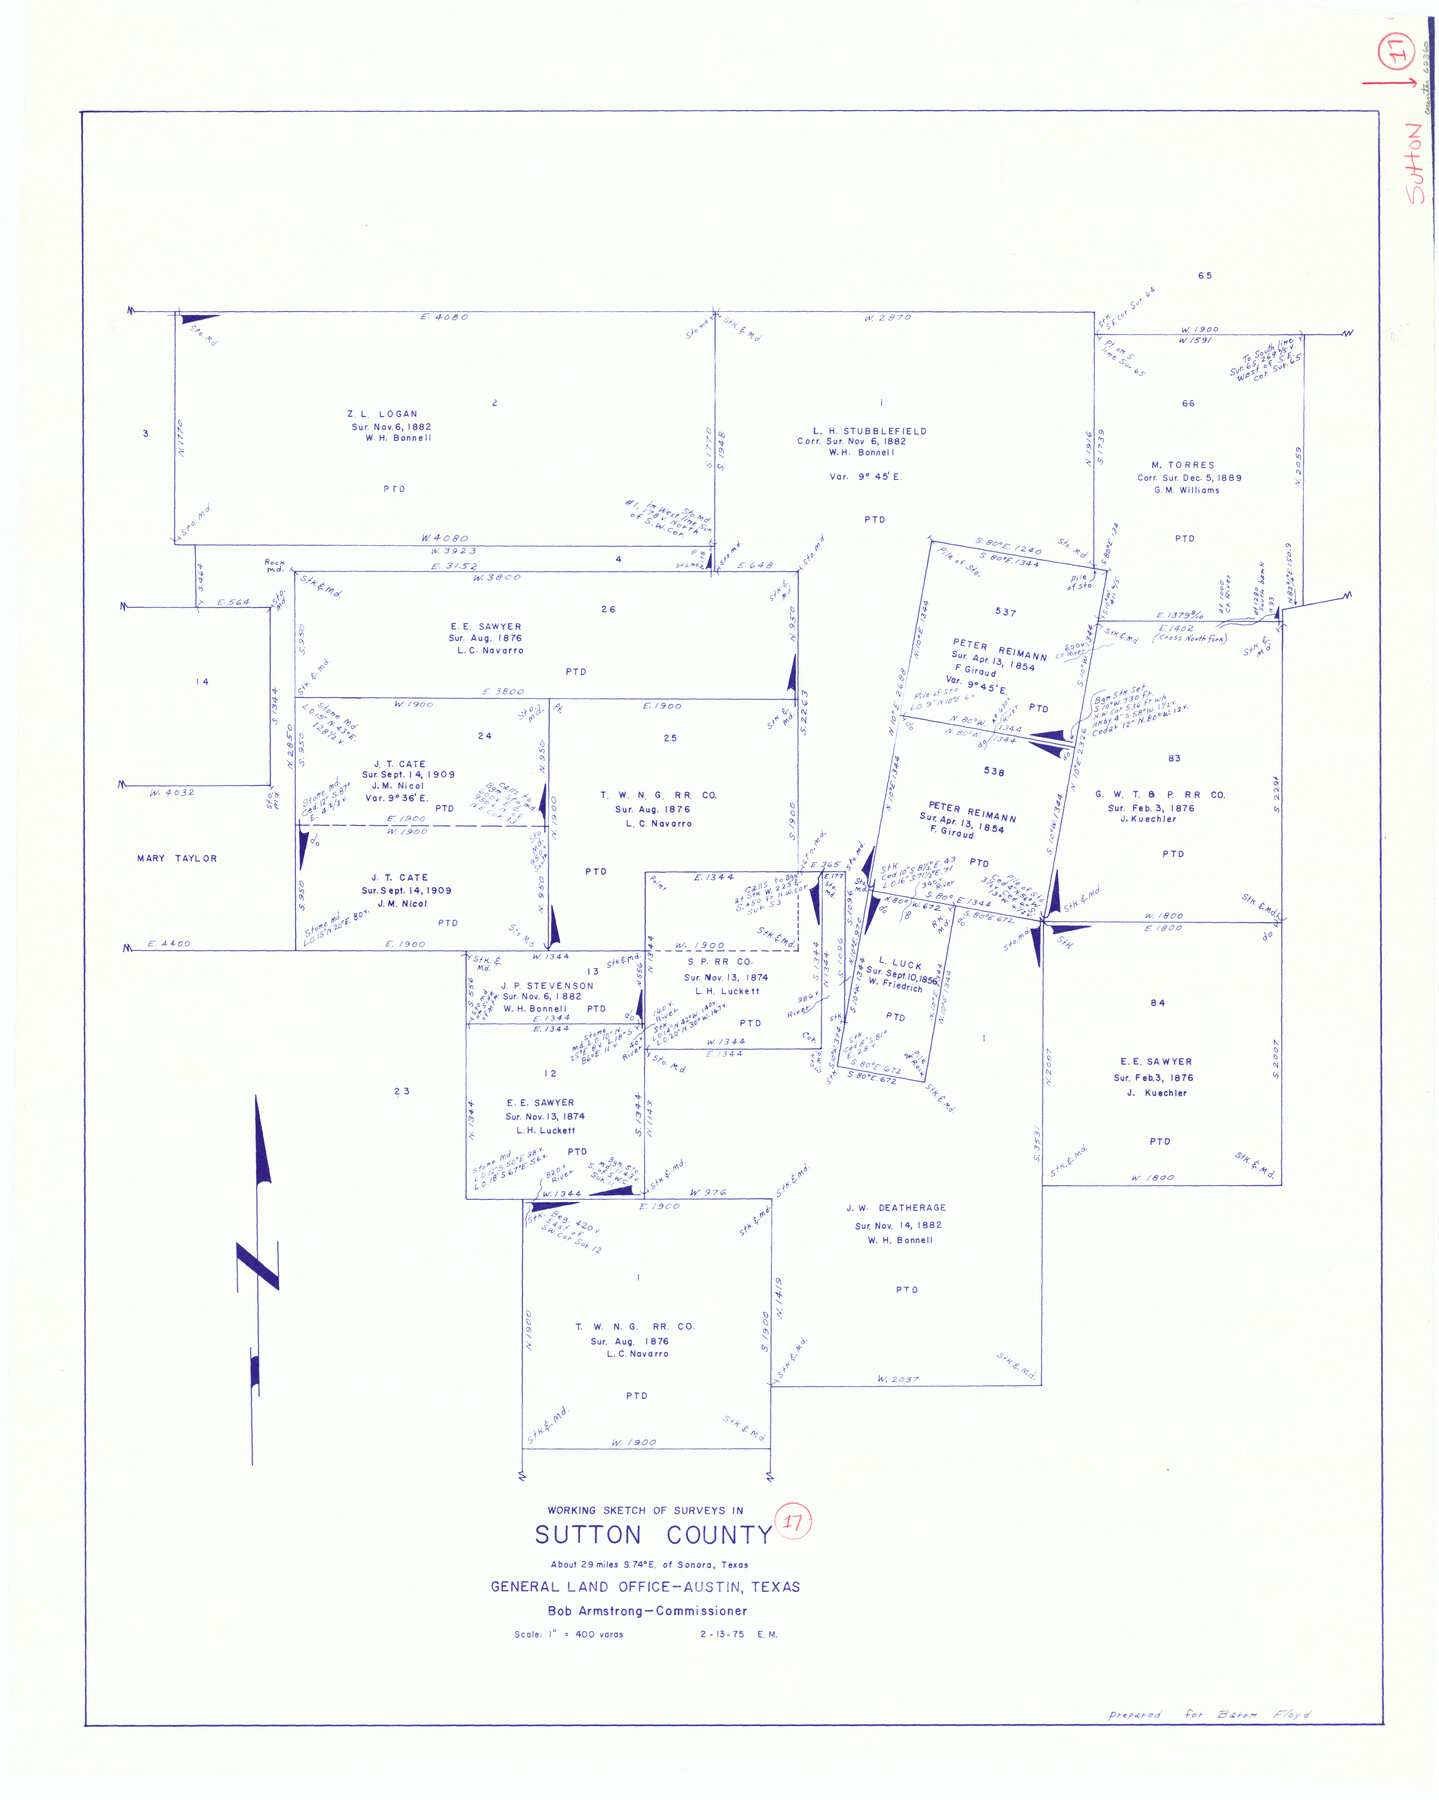 62360, Sutton County Working Sketch 17, General Map Collection